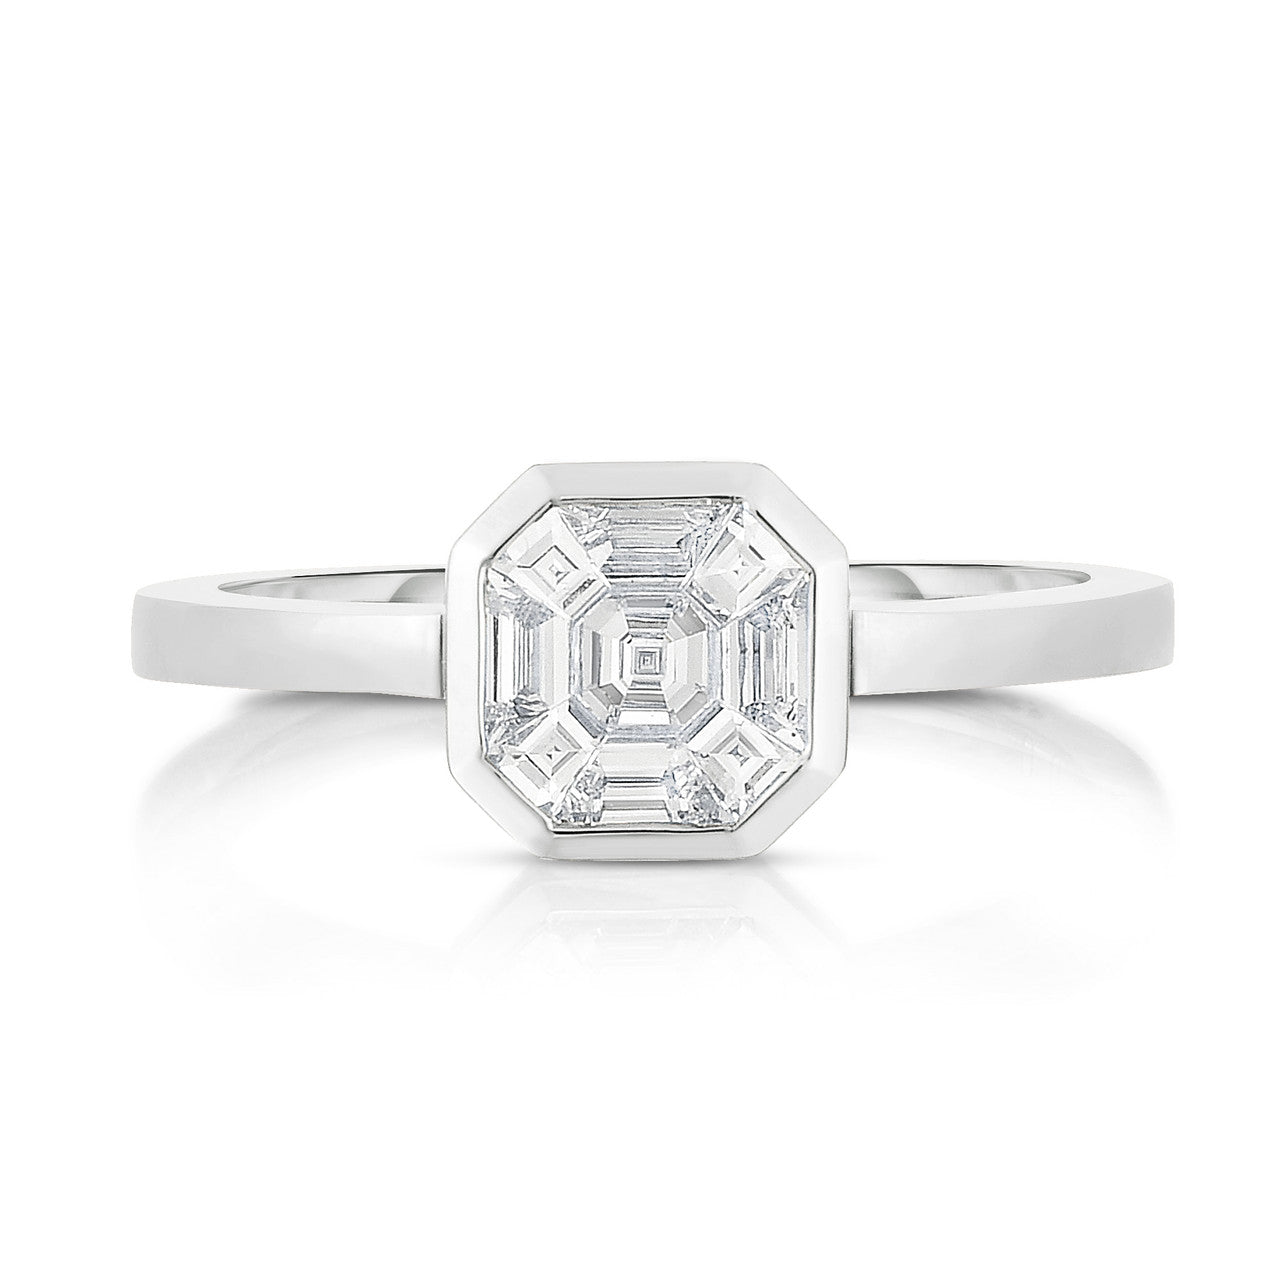 Asscher Cut Engagement Rings: The Complete Guide